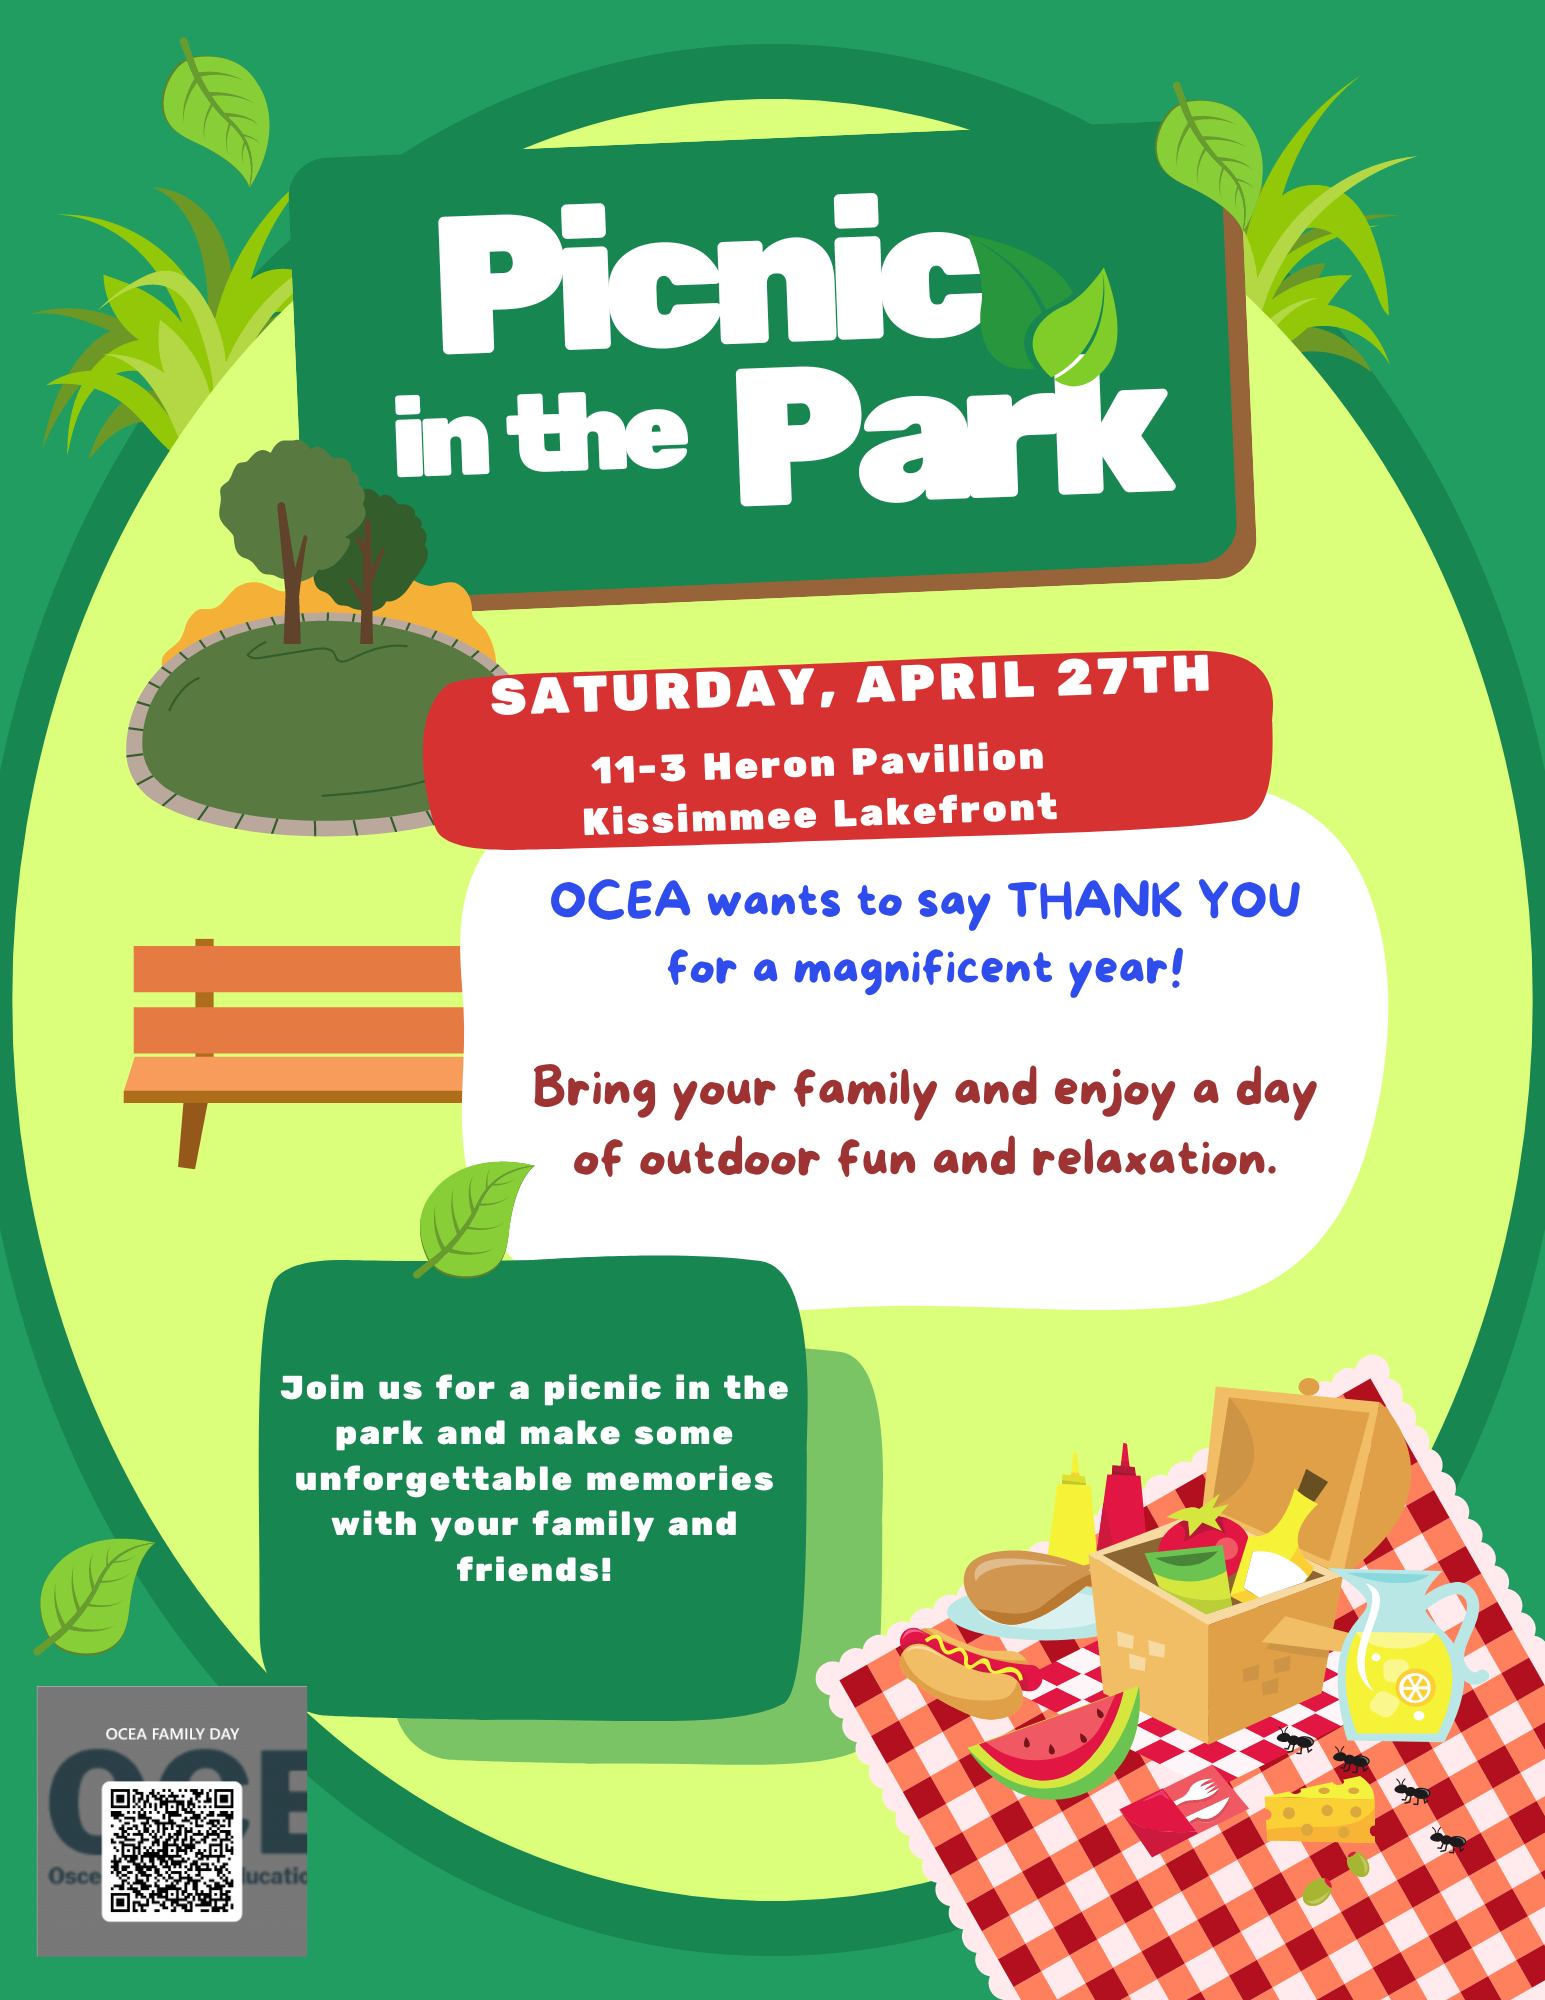 Picnic in the Park flyer